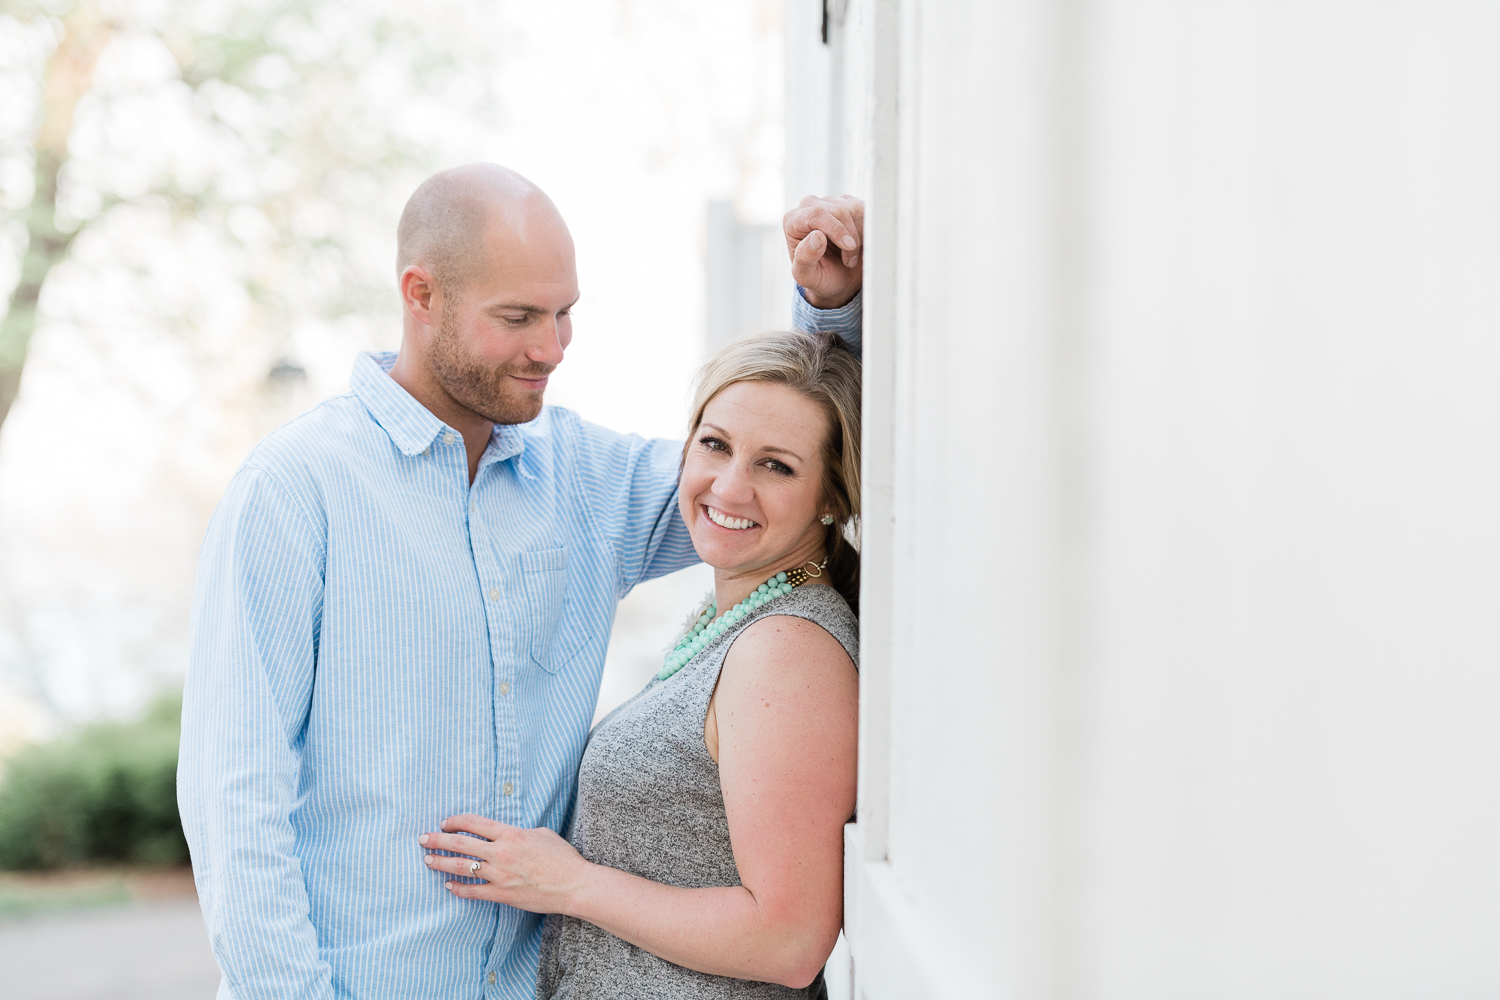 Fiance unbuttons light blue shirt in front of giggling fiance against a white wall